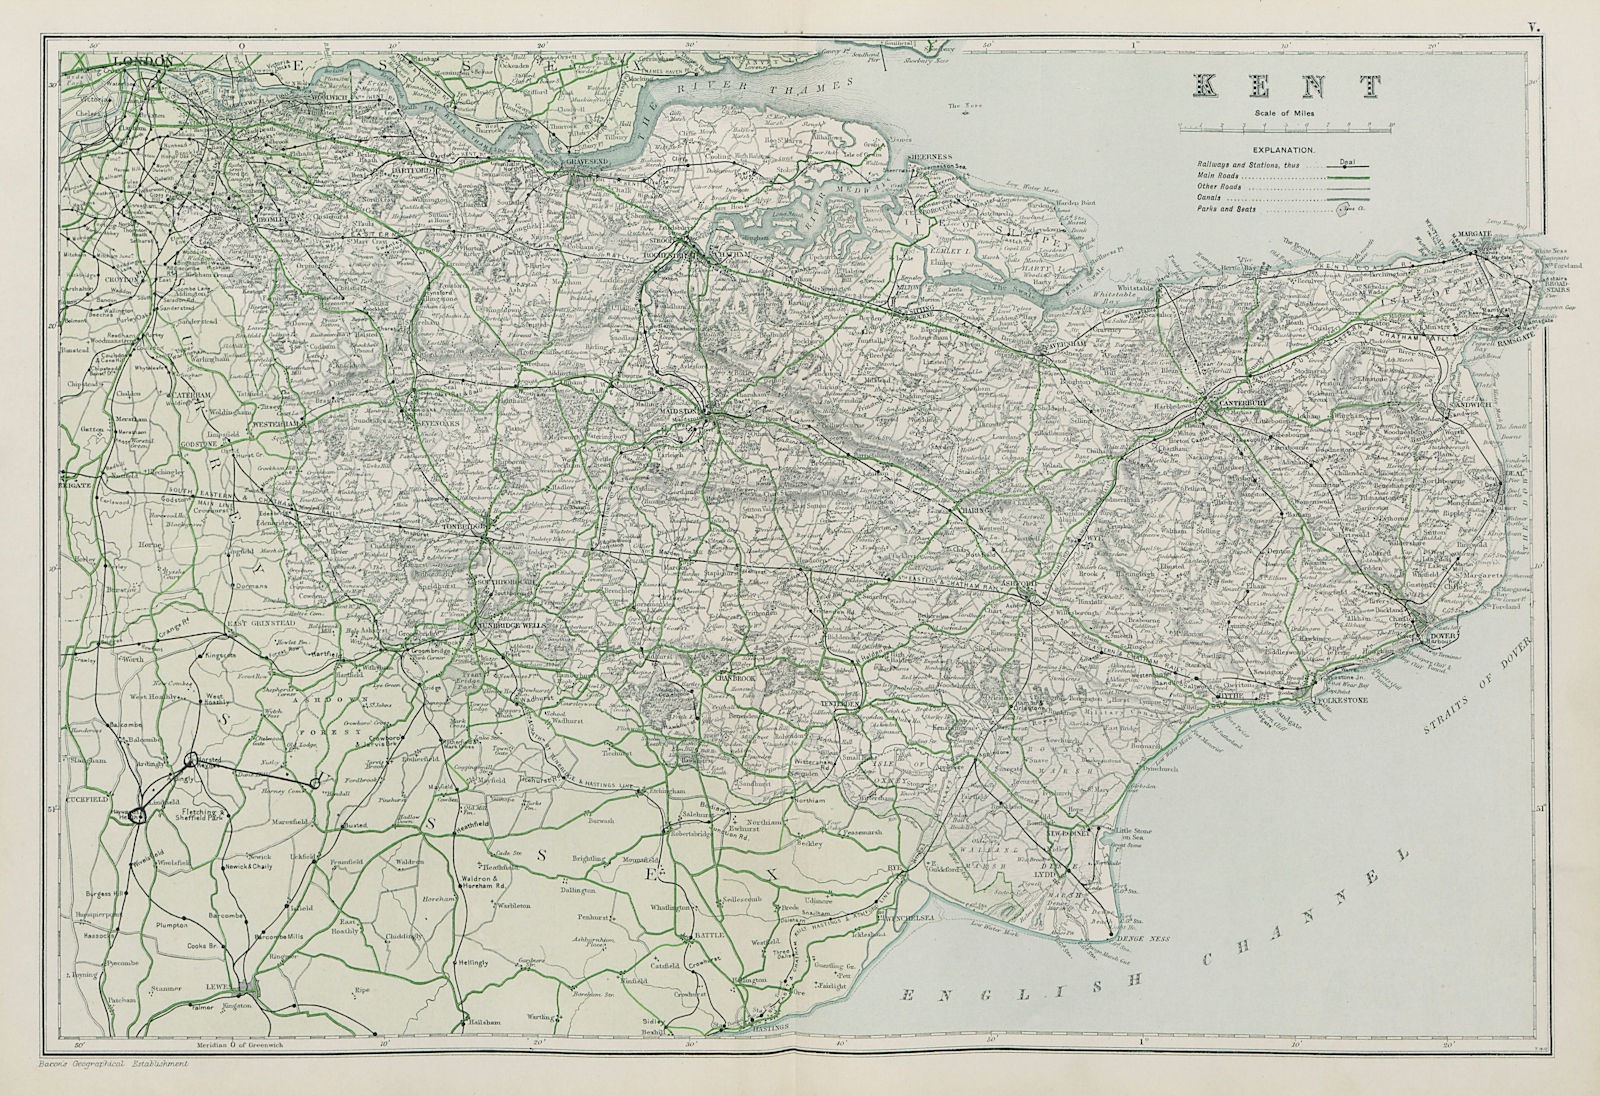 Associate Product KENT. Showing Parliamentary divisions, boroughs & parks. BACON 1913 old map